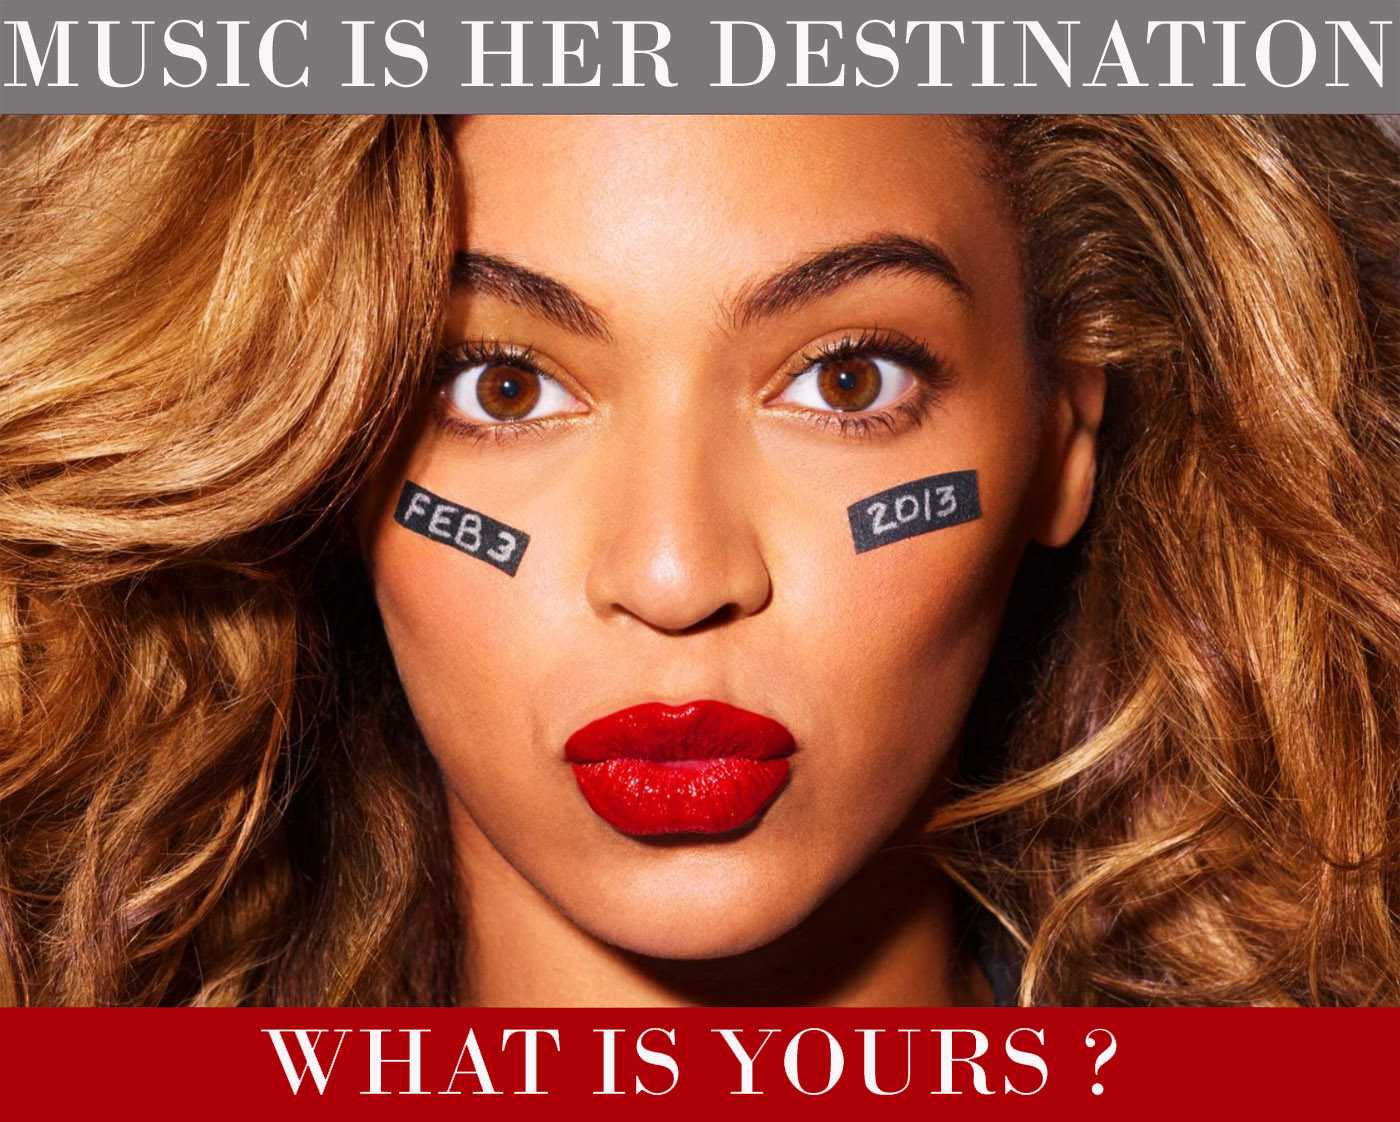 Music is her destination. What is yours?